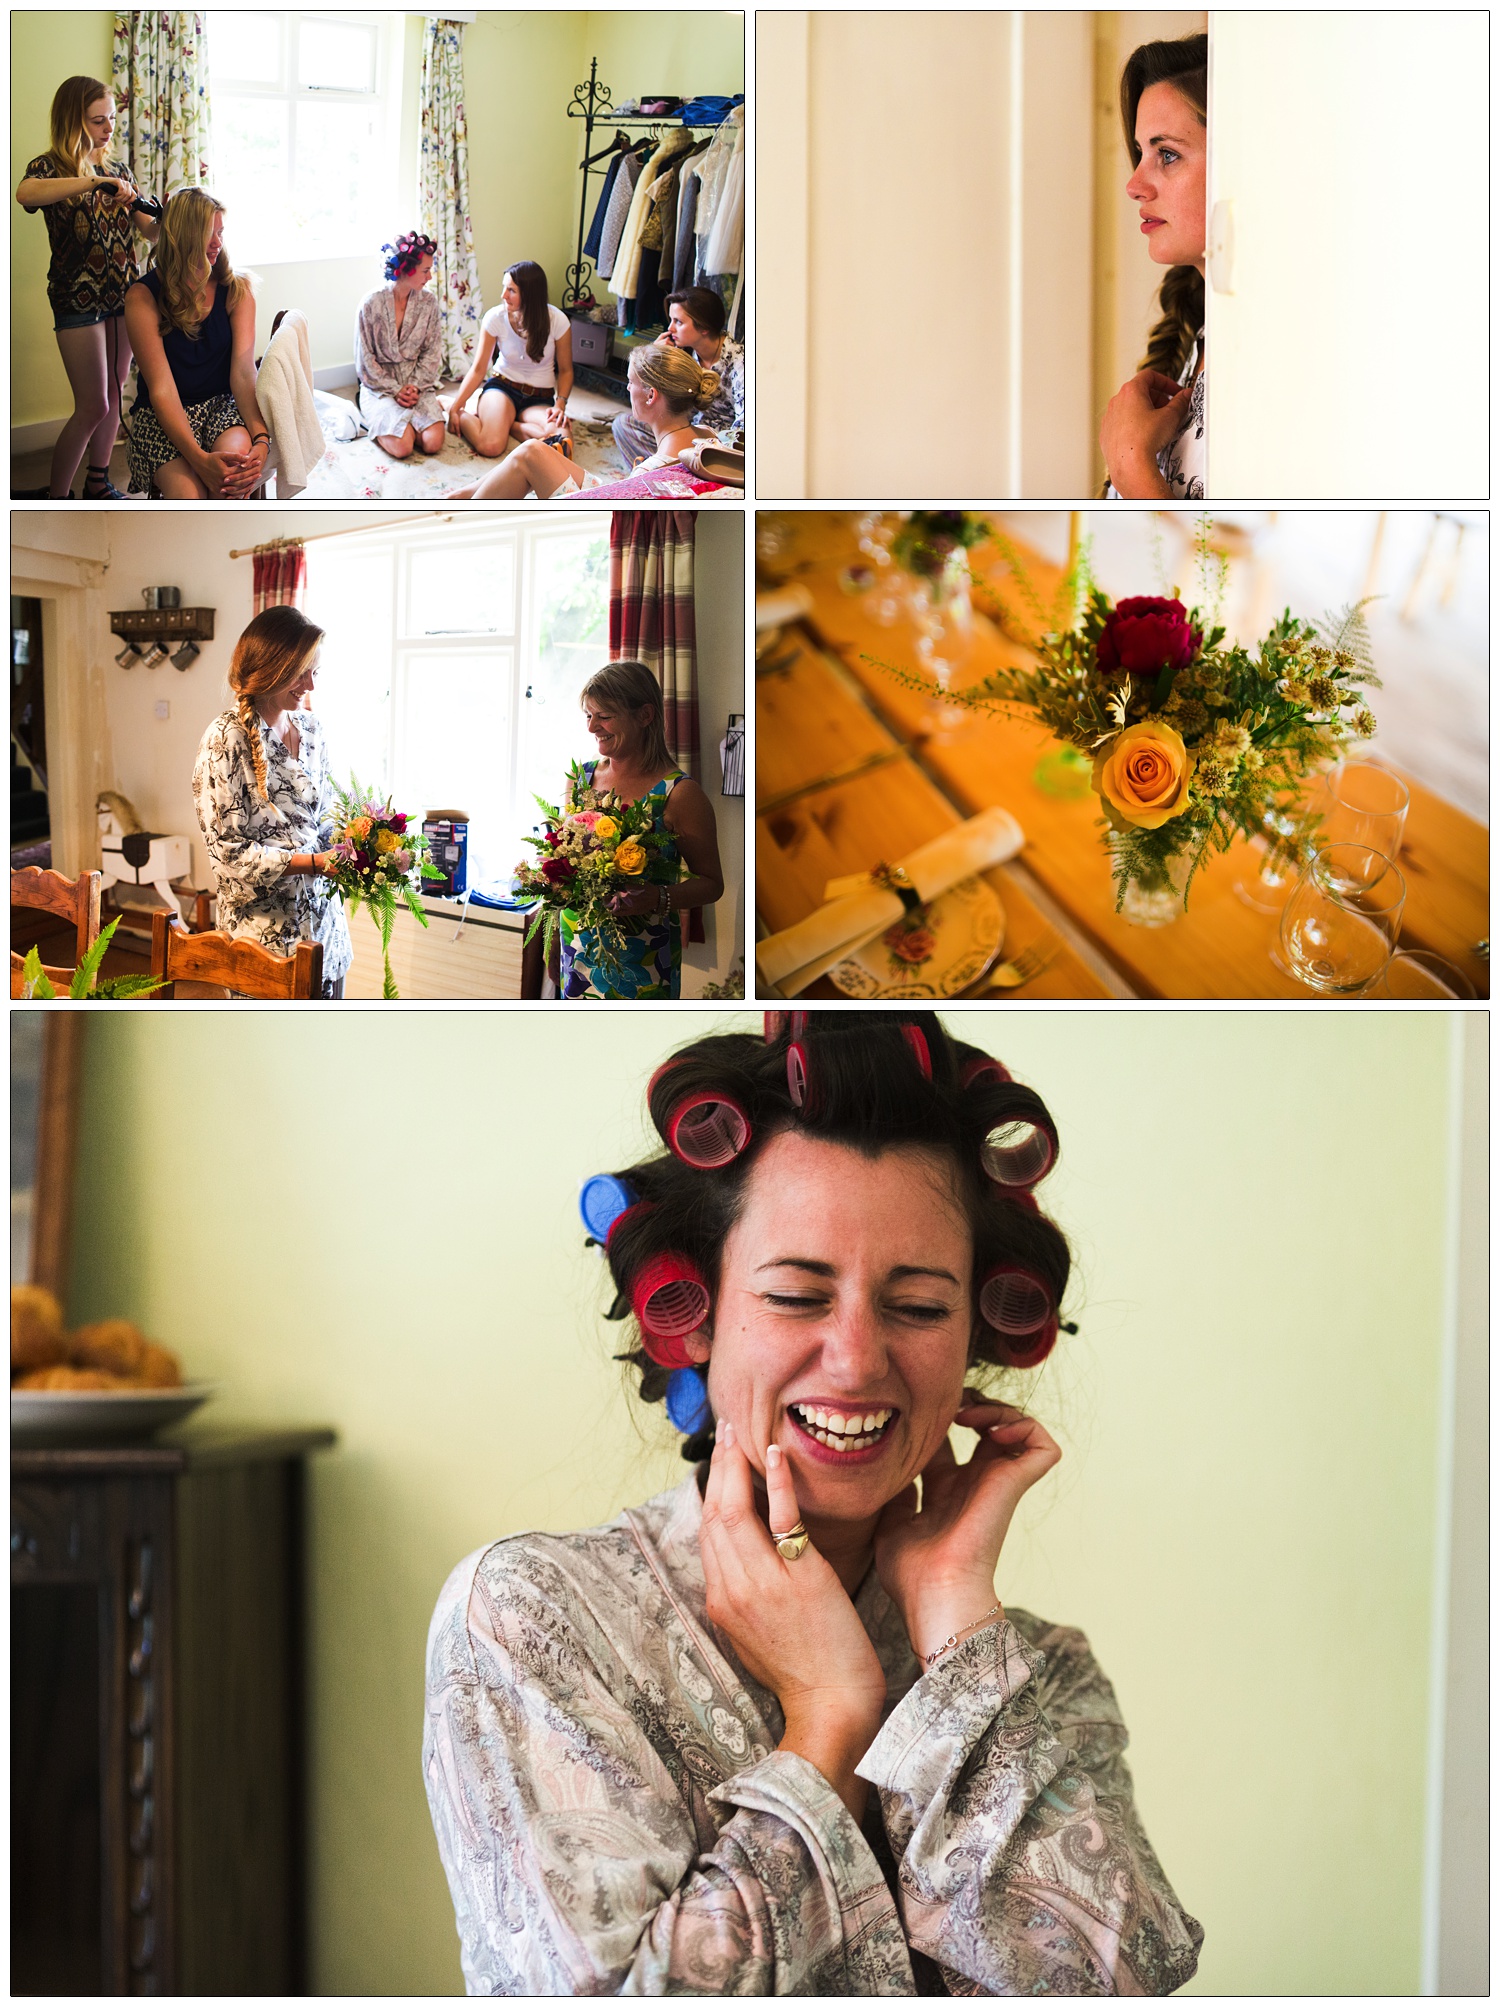 Bride laughs with rollers in her hair.